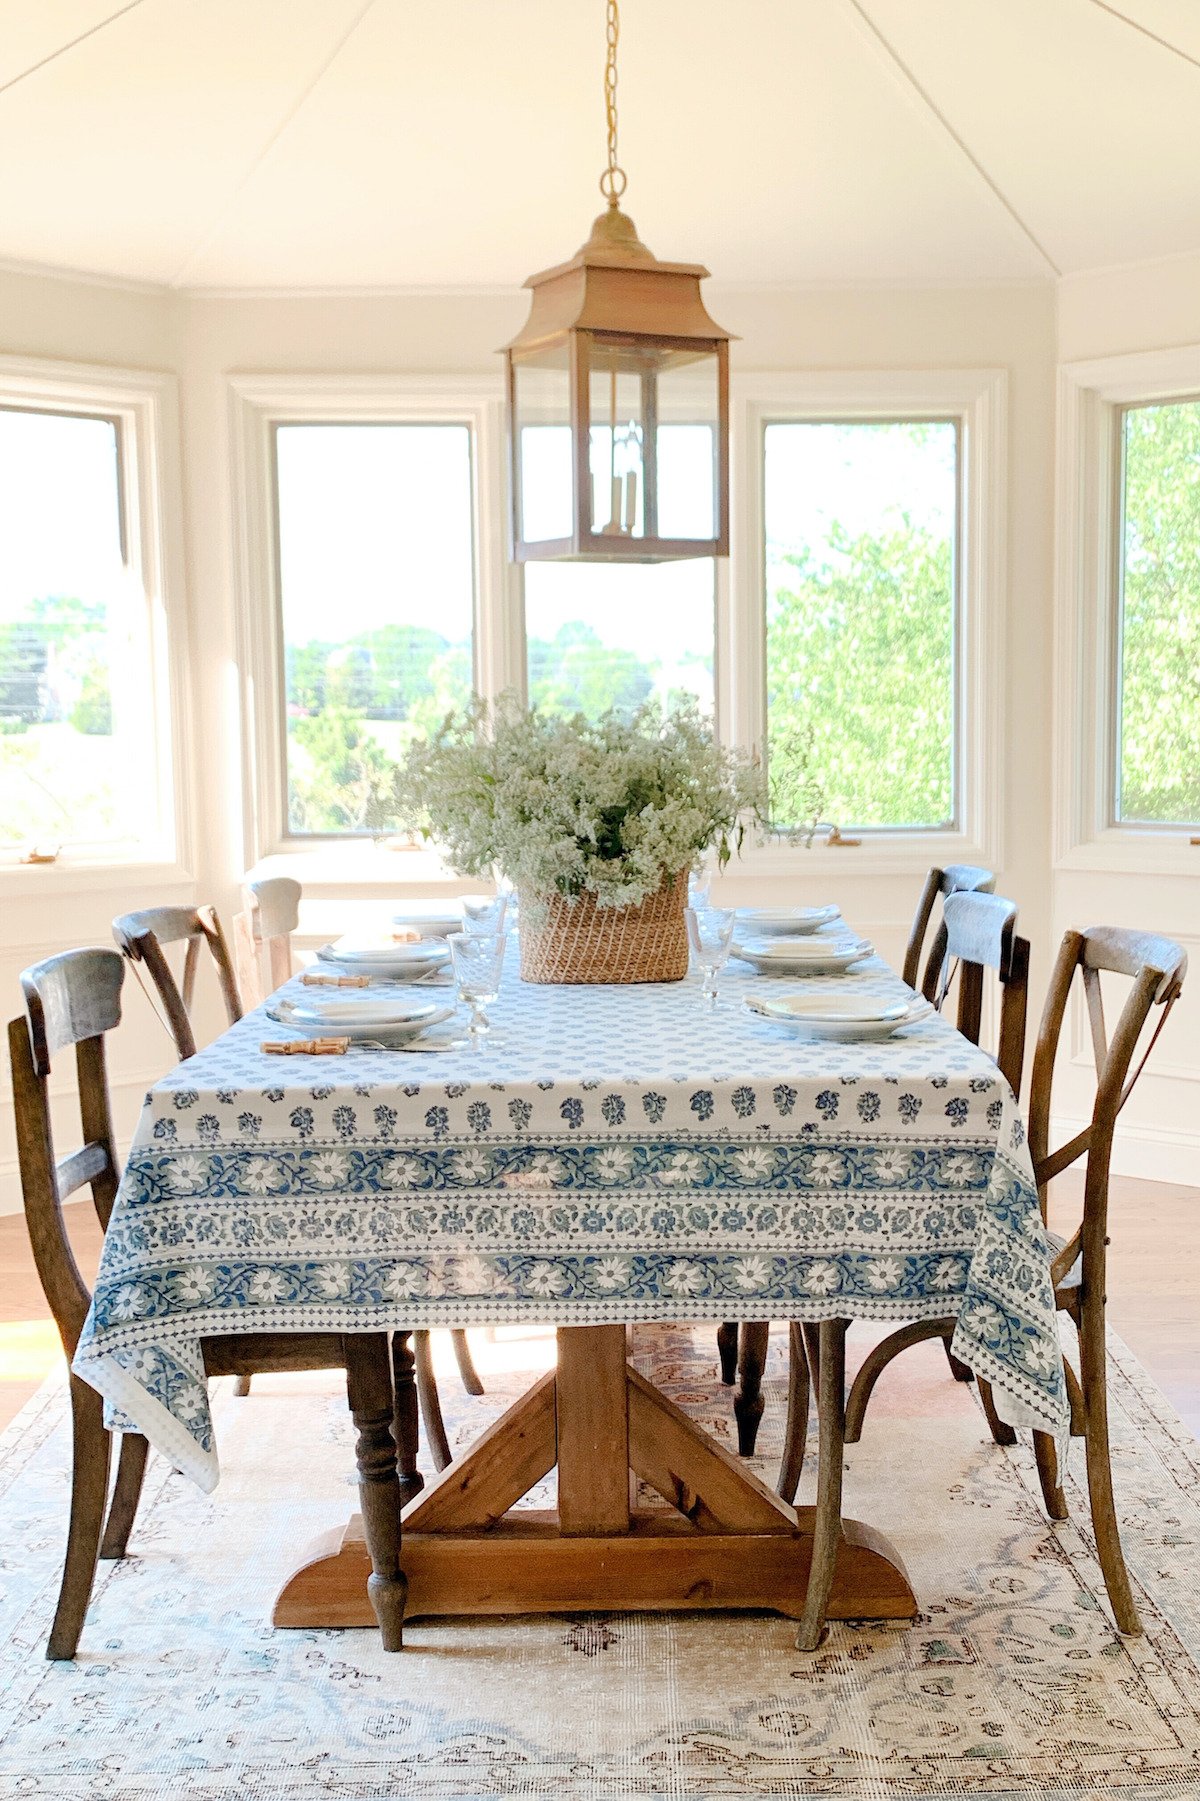 A dining room table with chairs and a blue block print tablecloth.